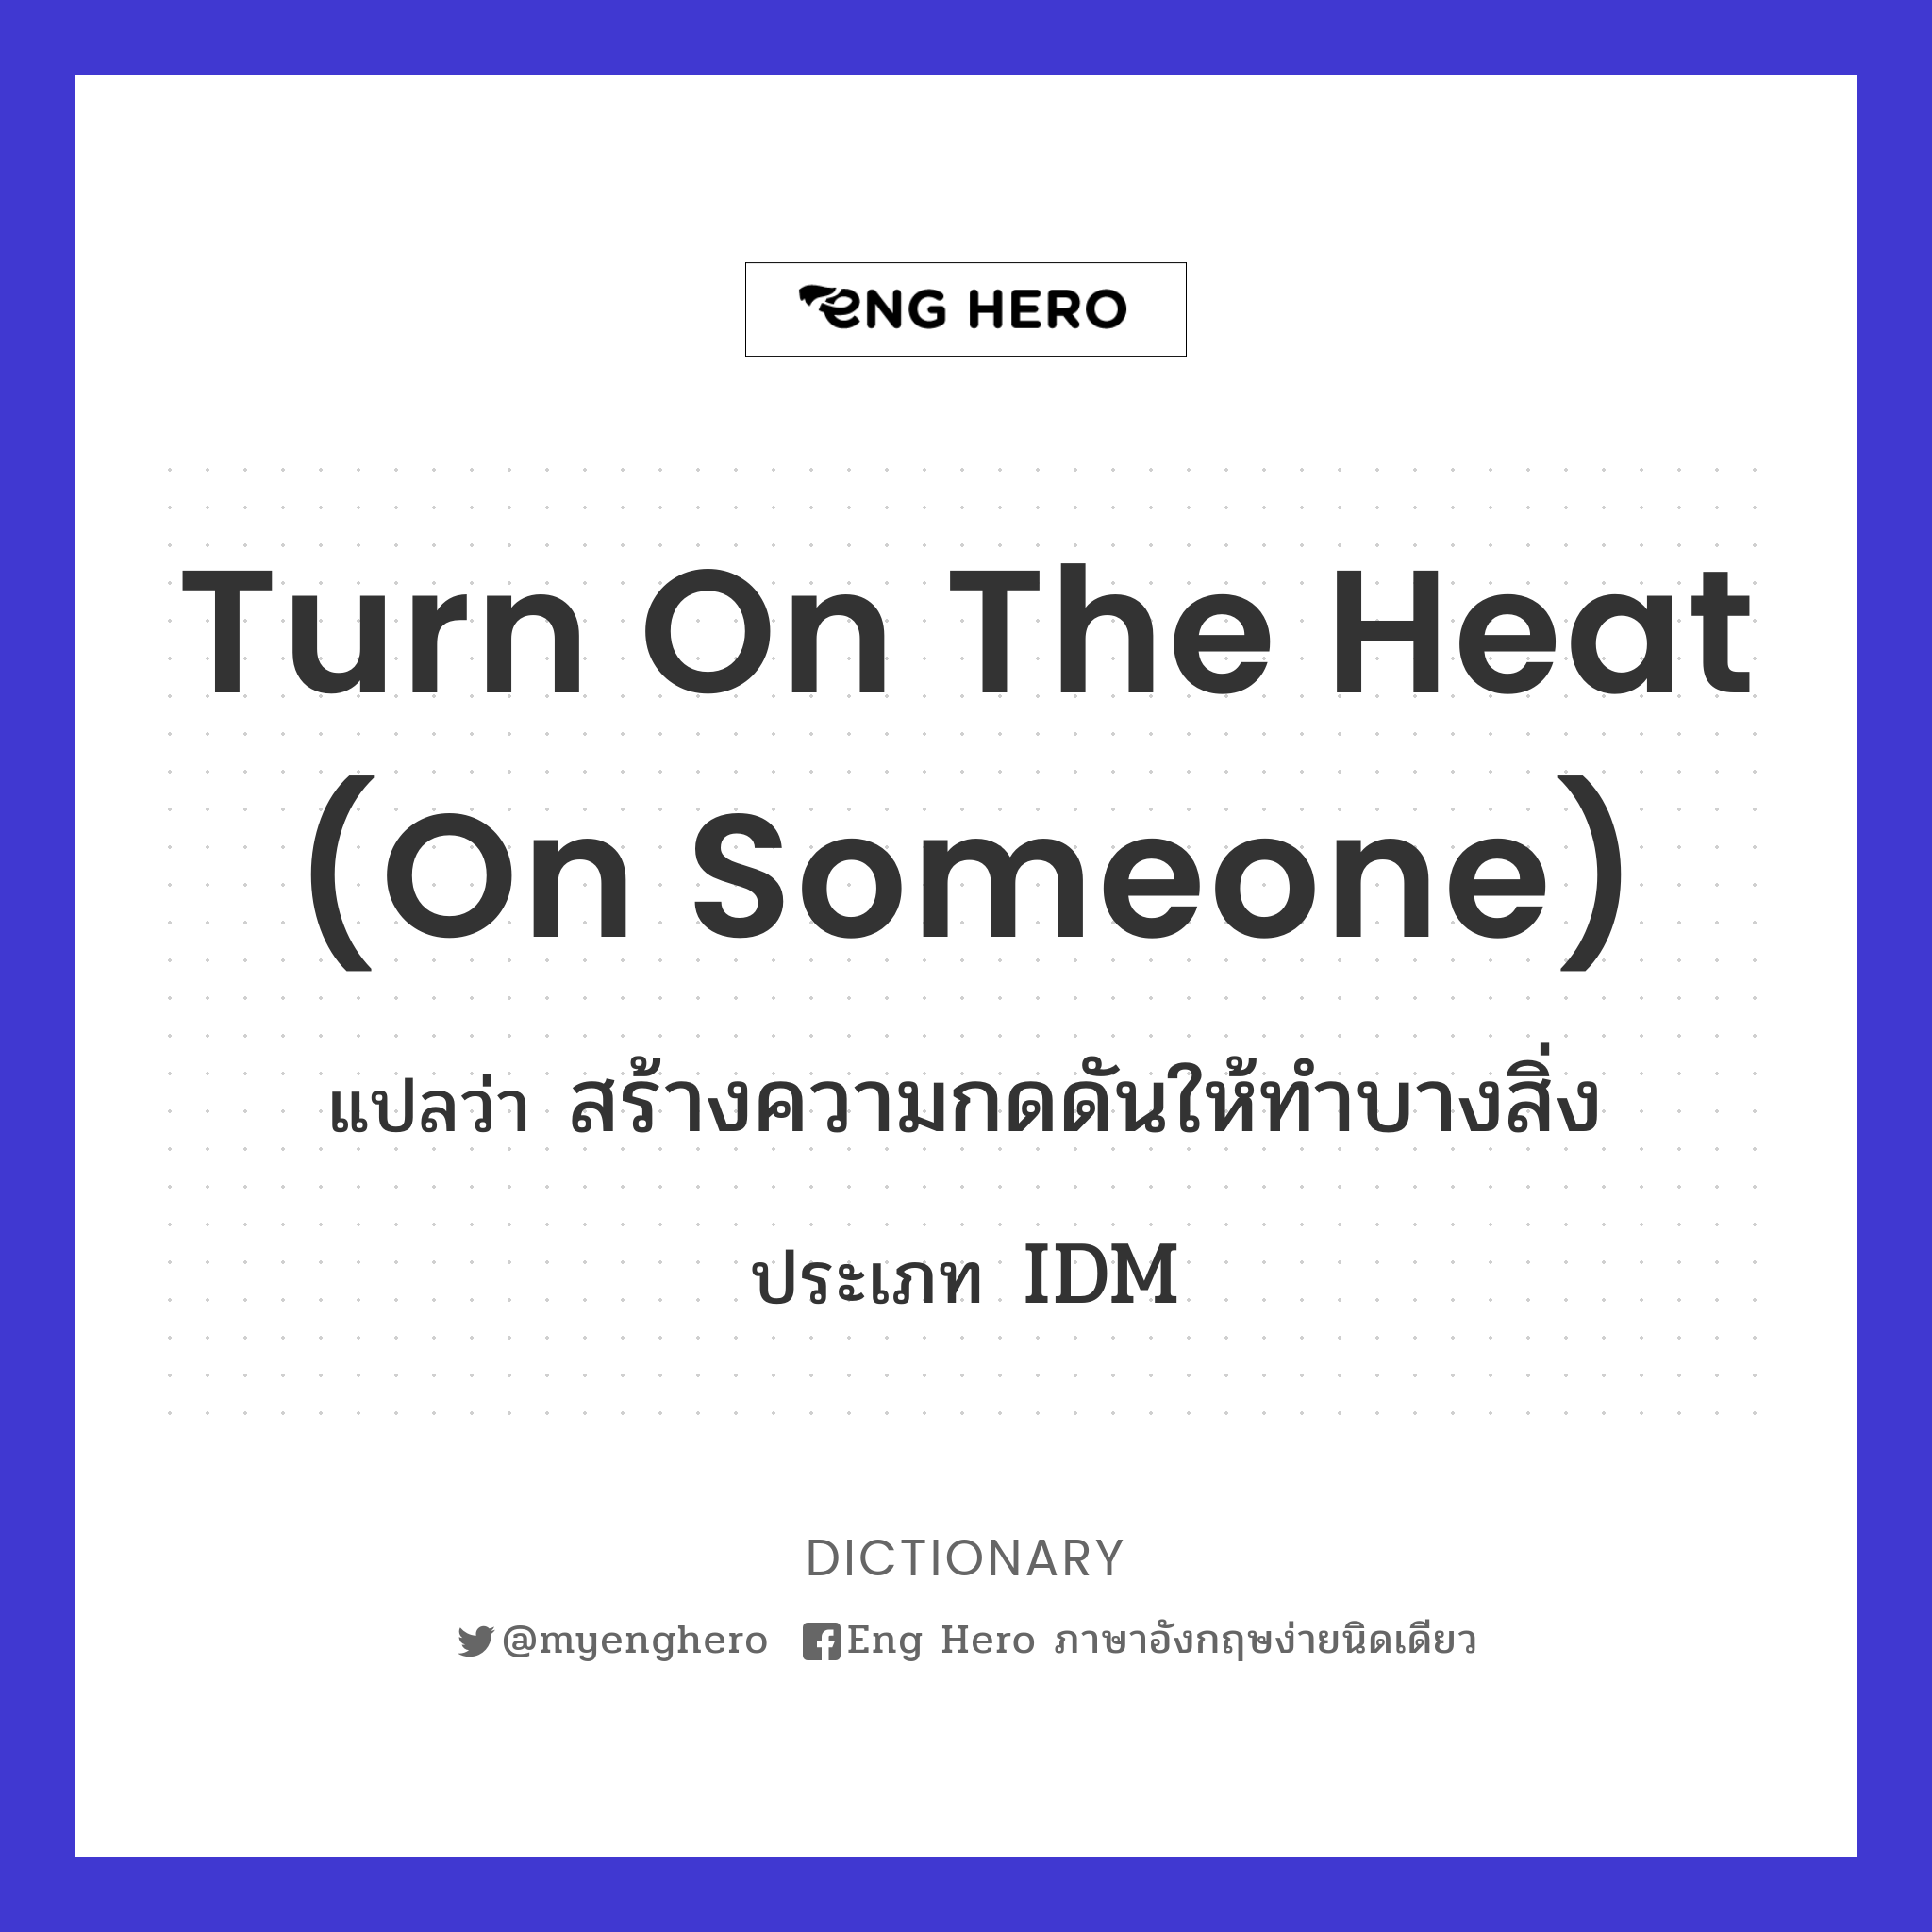 turn on the heat (on someone)